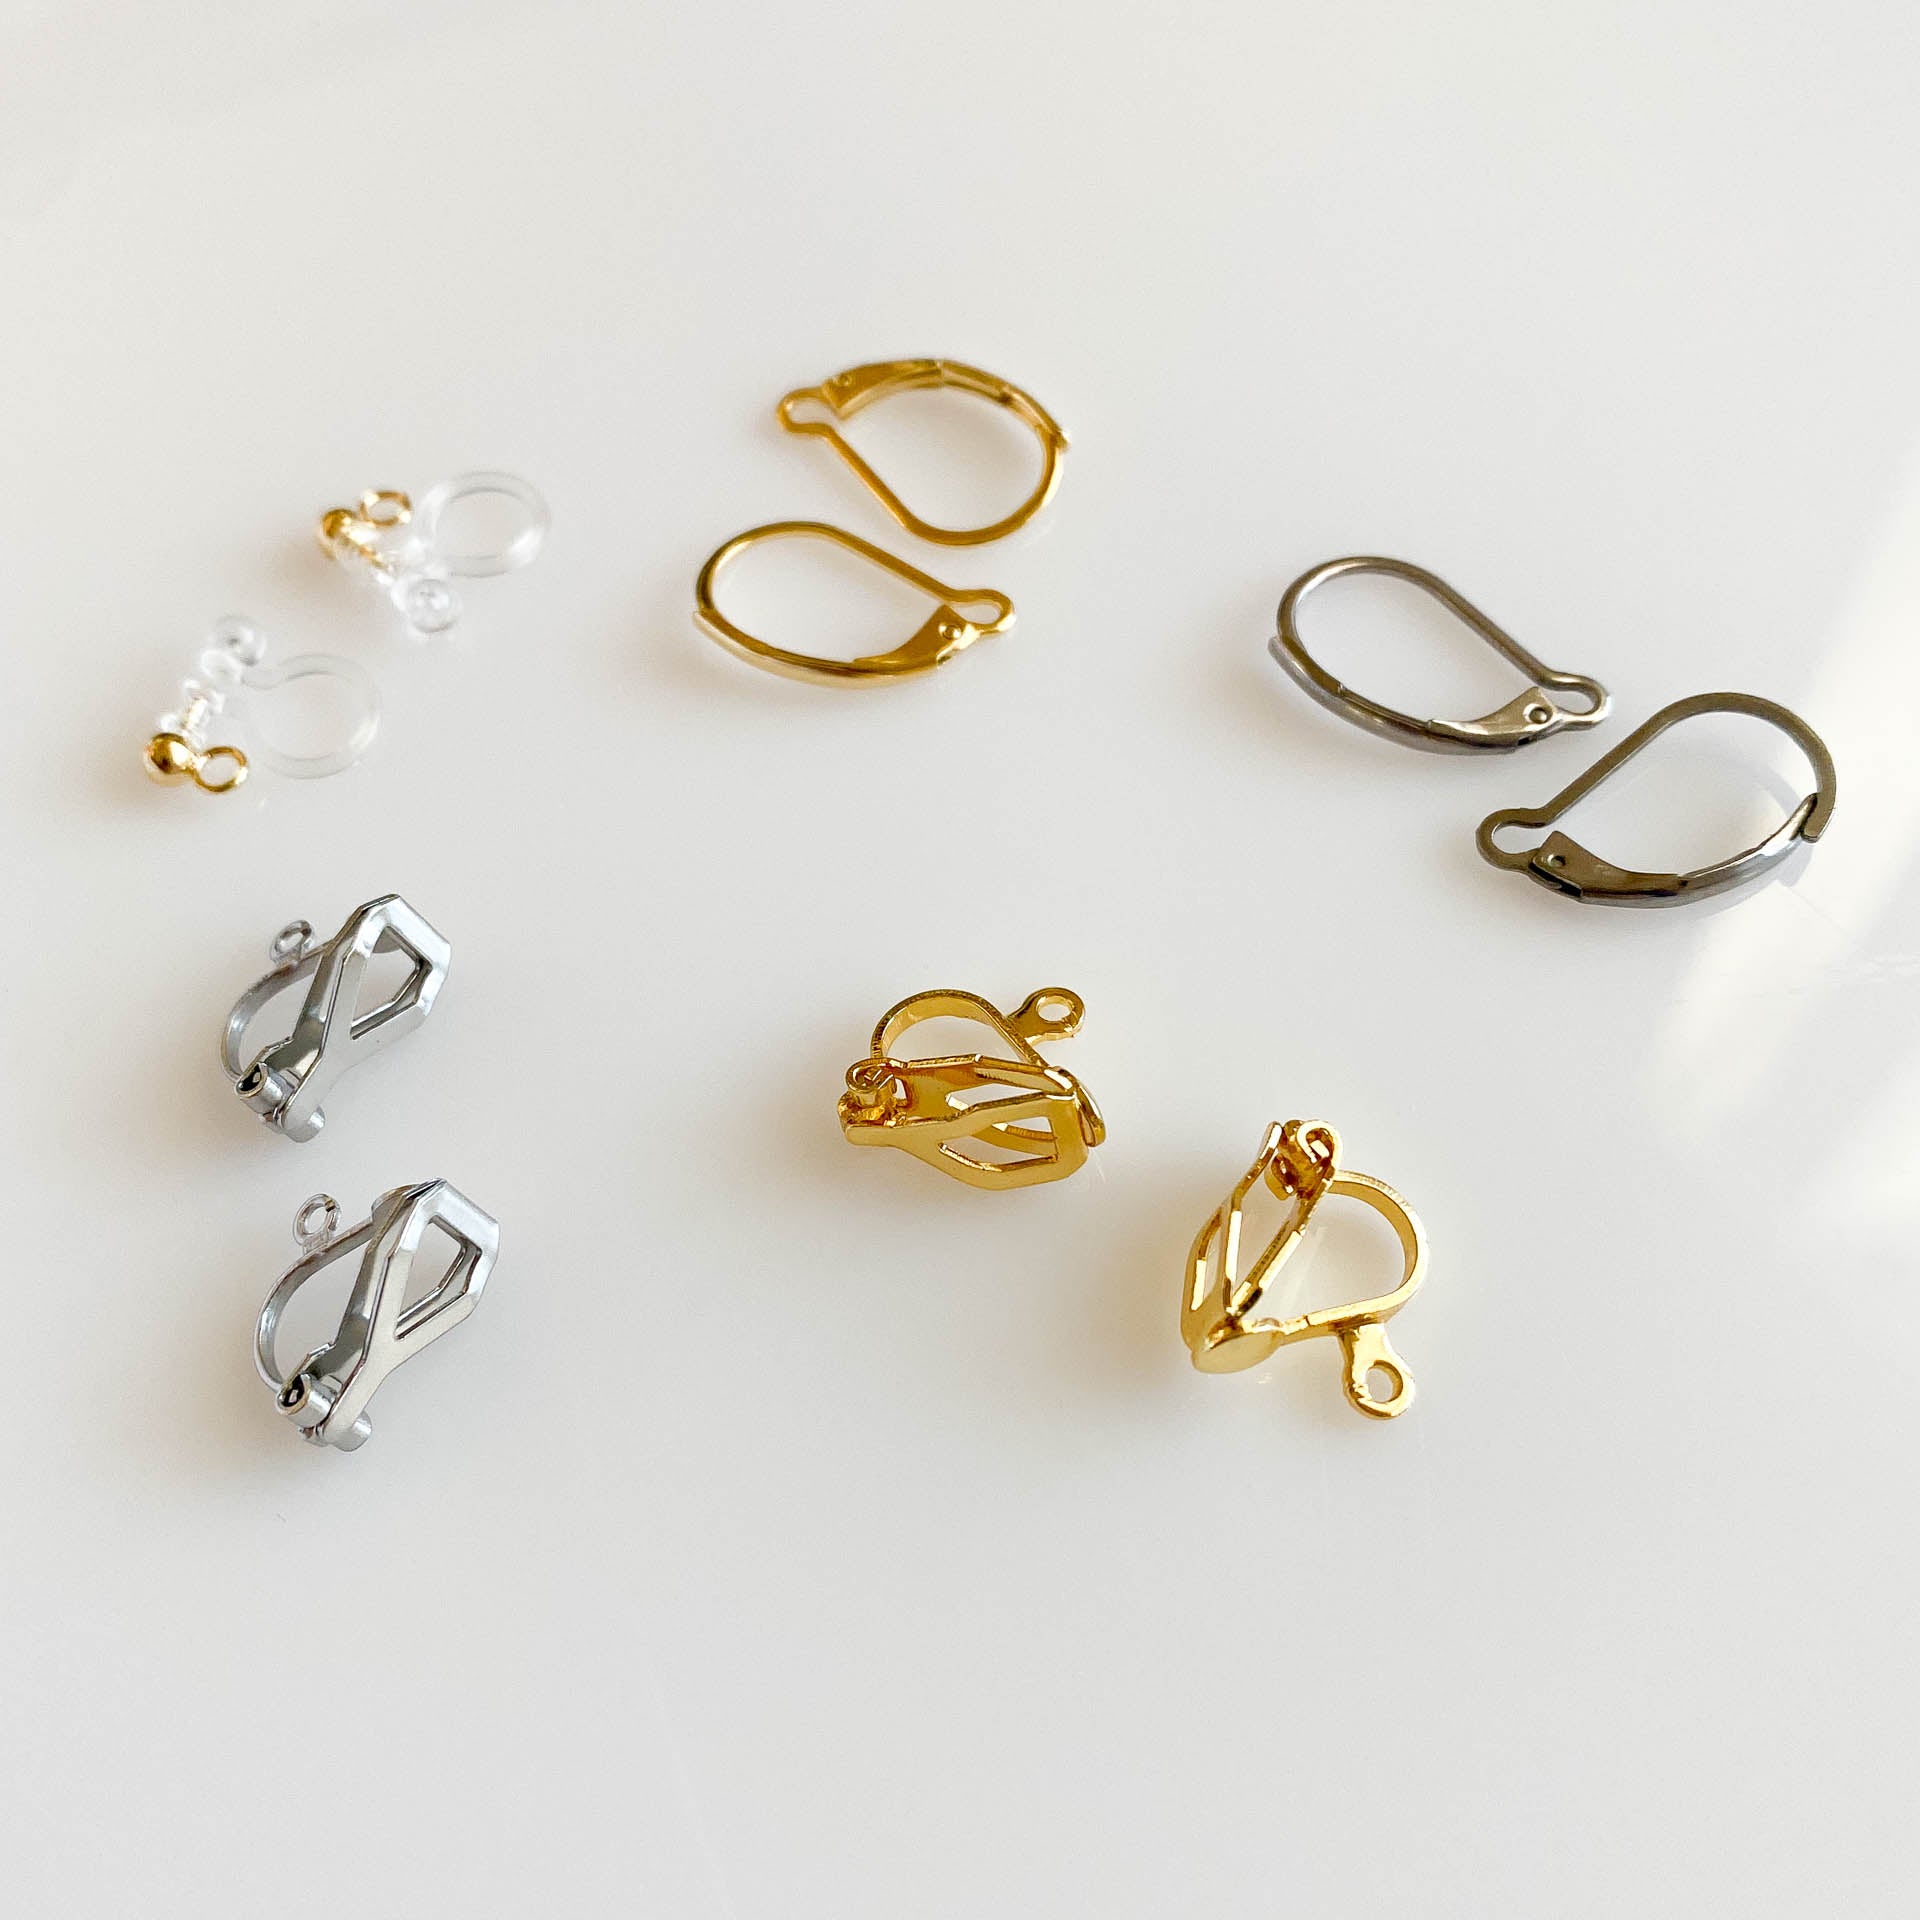 Clip Earrings Findings: Extra Small Paddle back For Adults